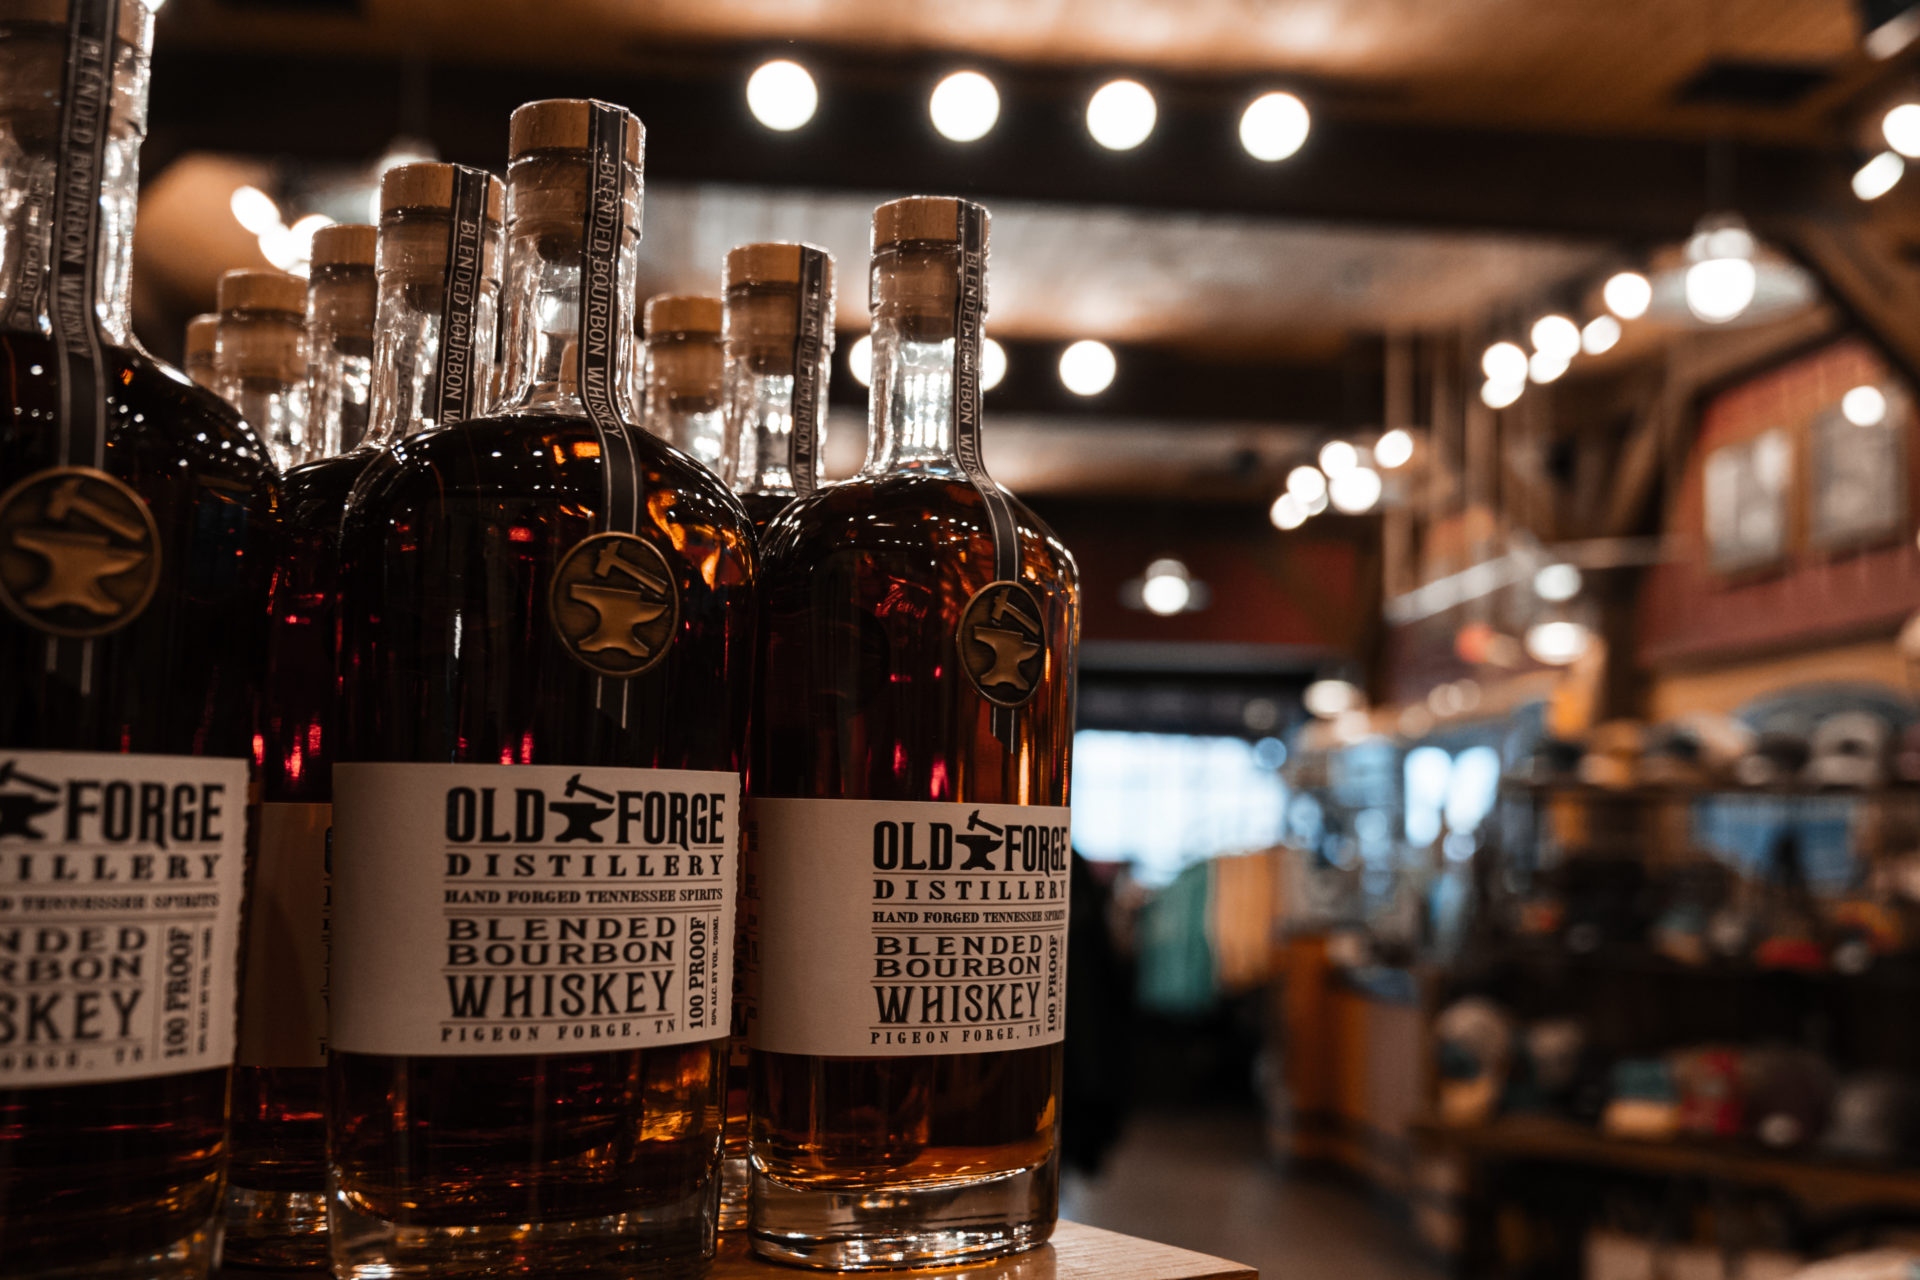 Product photography of Old Forge Distillery whiskey bottles sitting in their store.